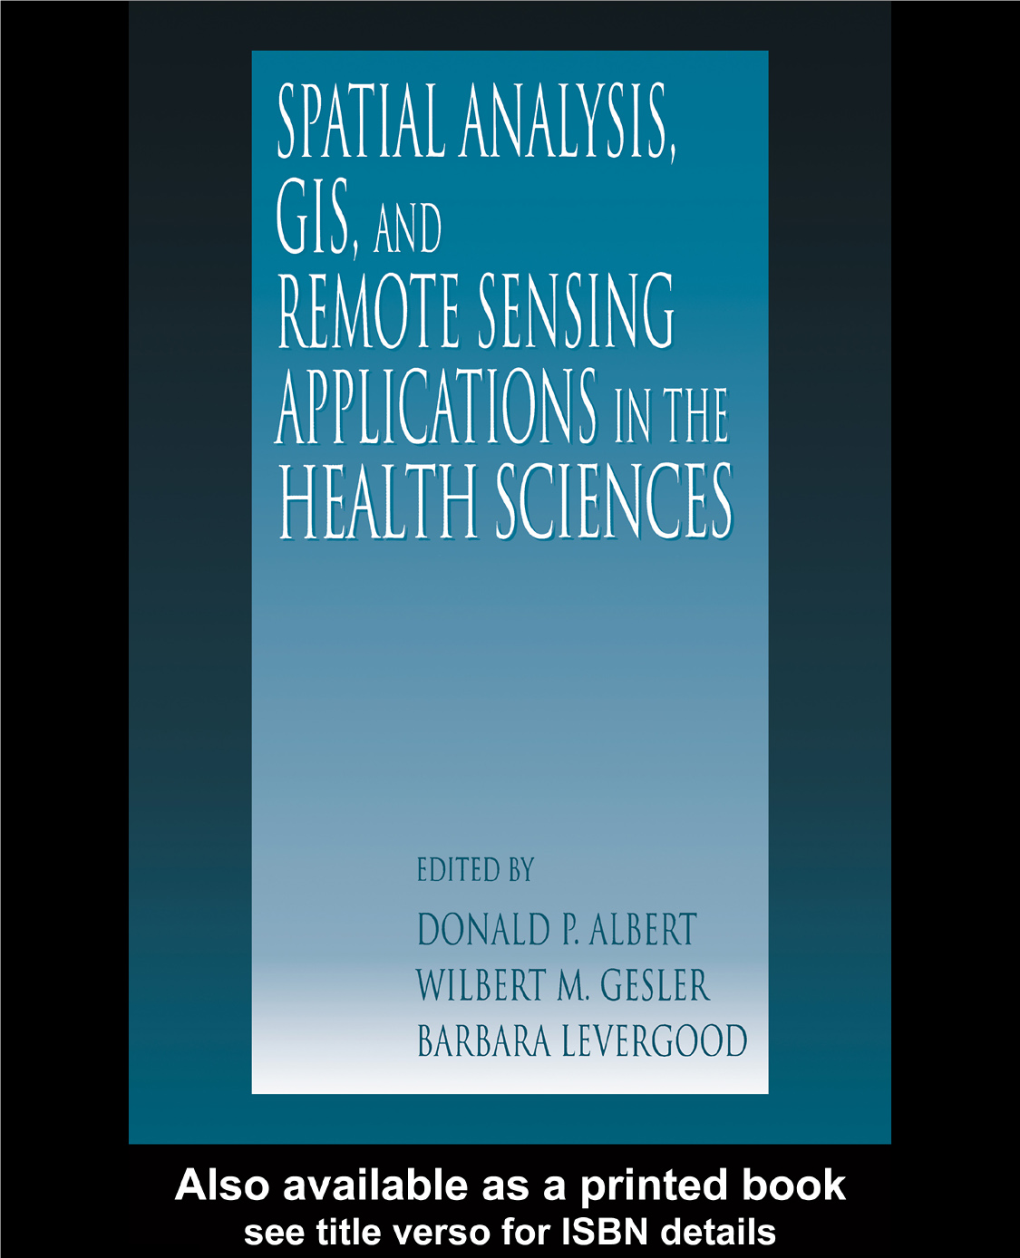 Spatial Analysis, GIS, and Remote Sensing Applications in the Health Sciences